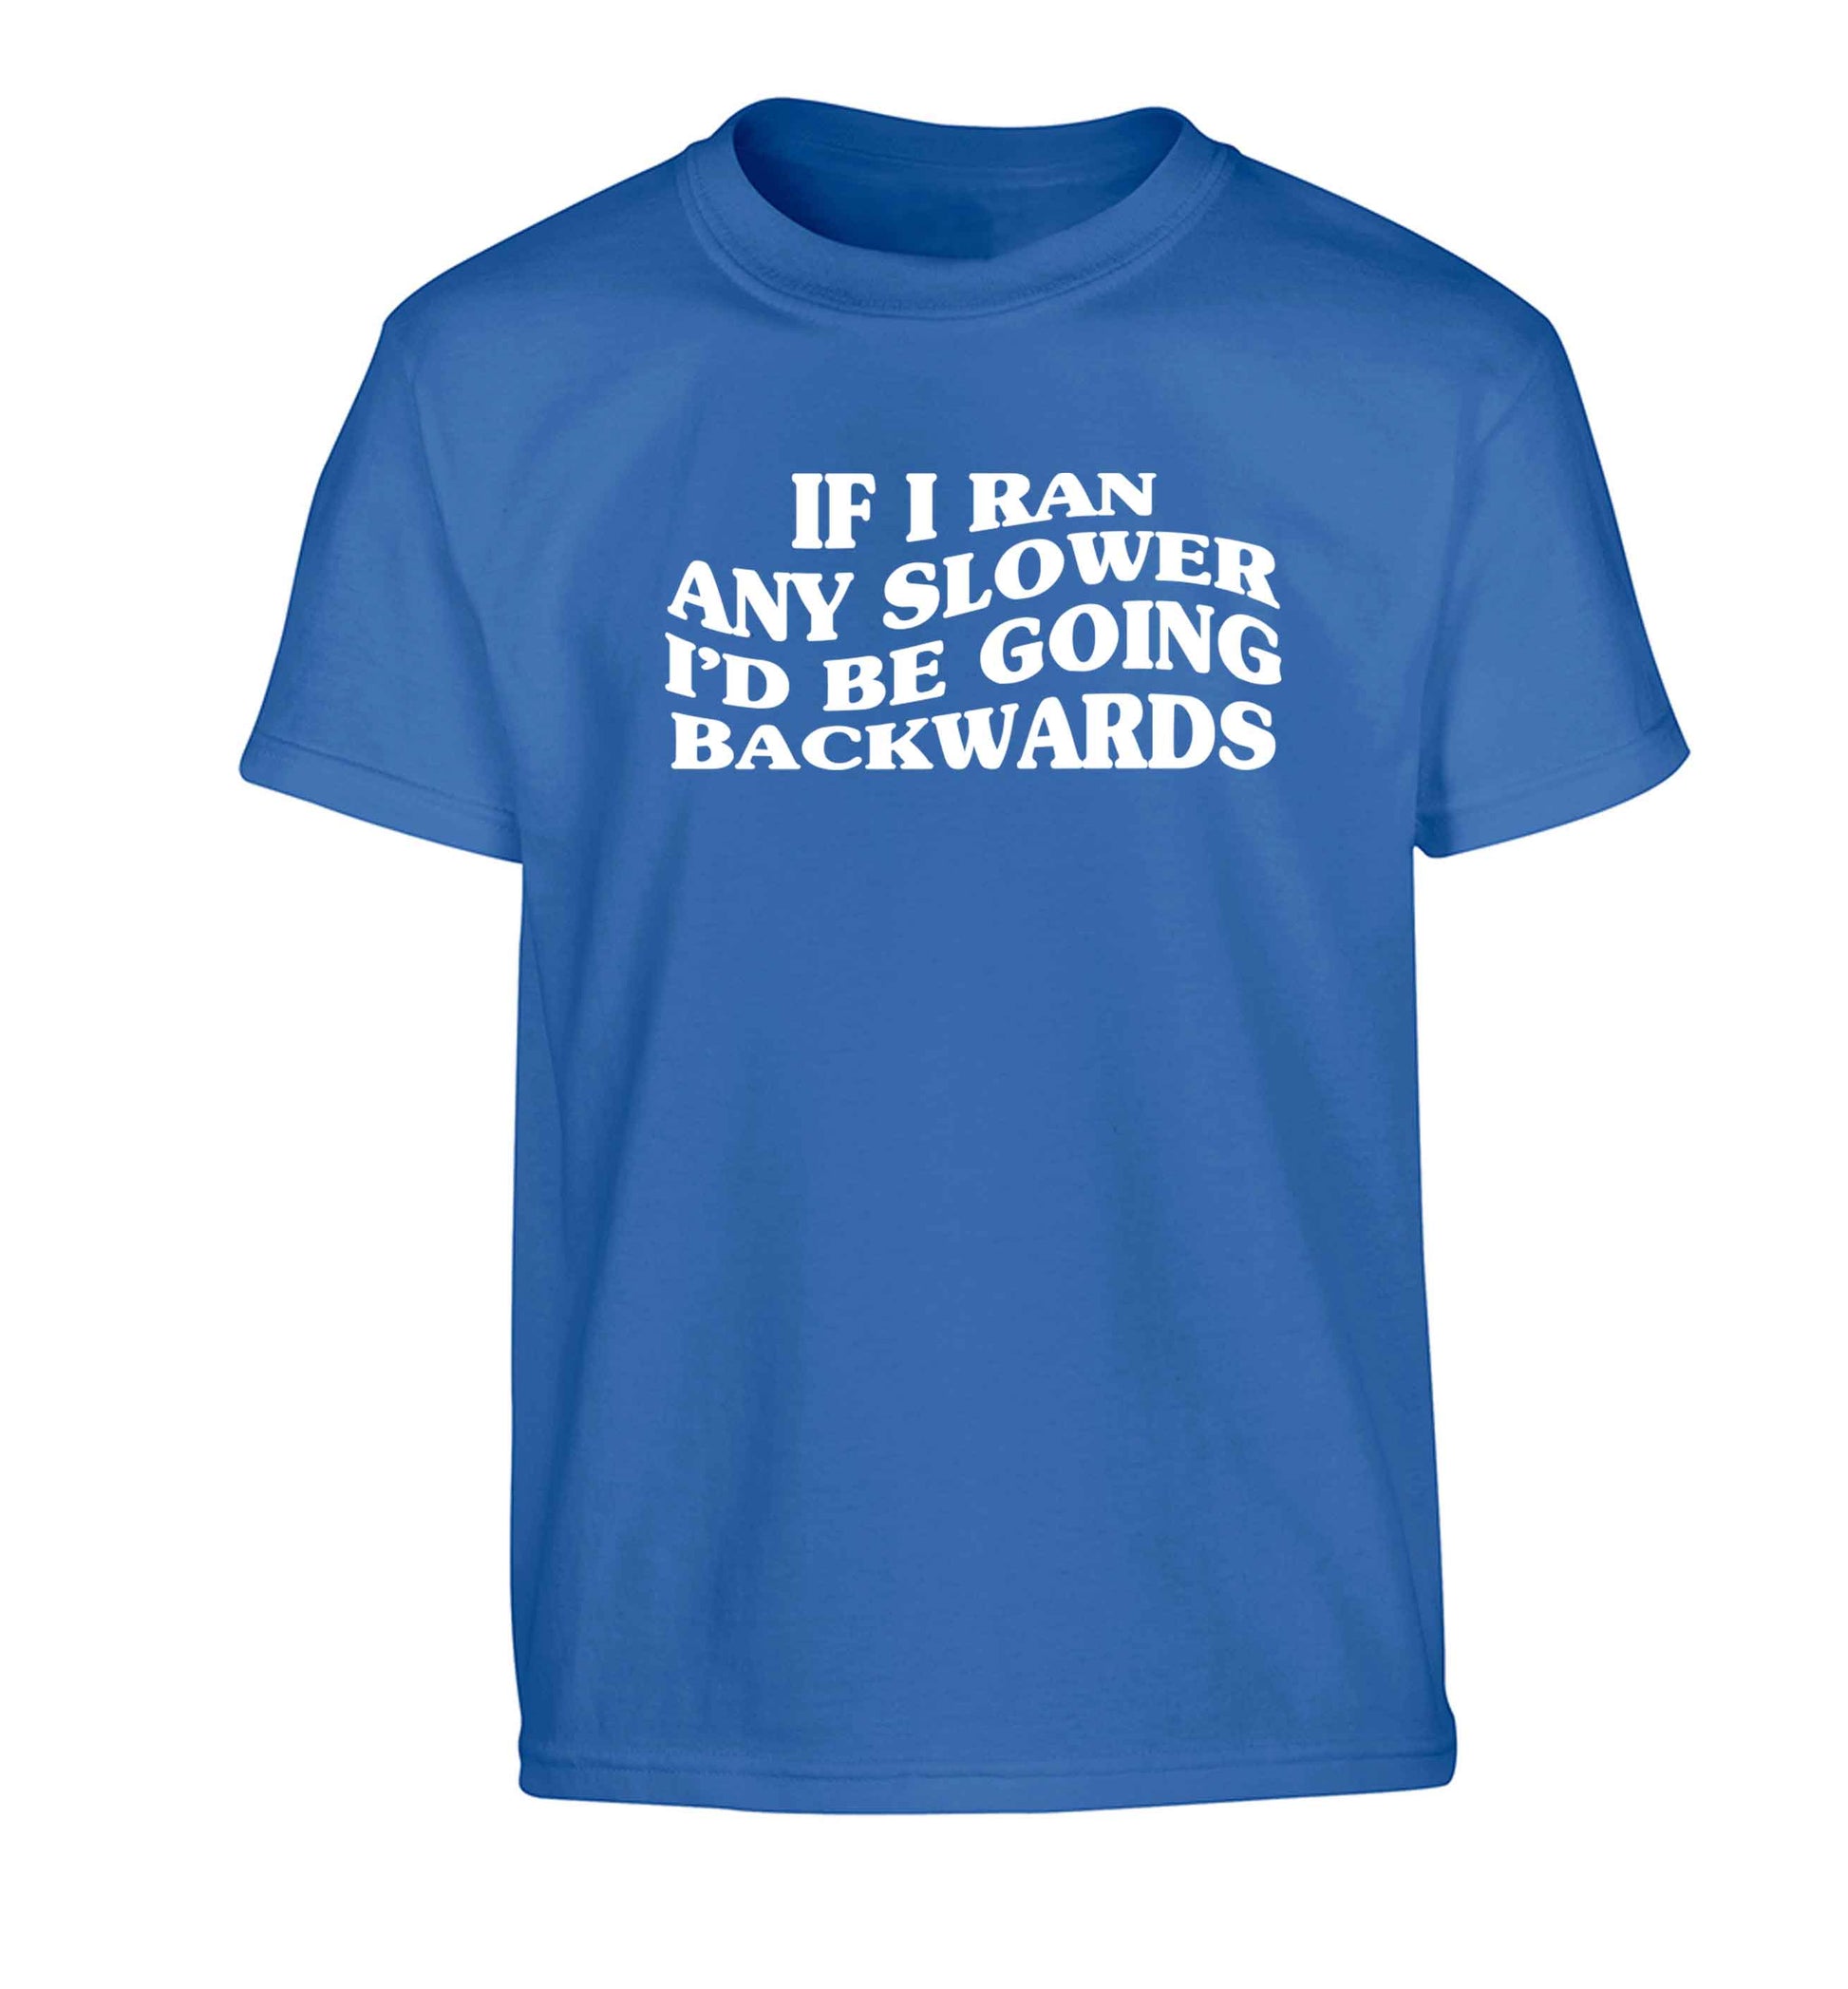 If I ran any slower I'd be going backwards Children's blue Tshirt 12-13 Years